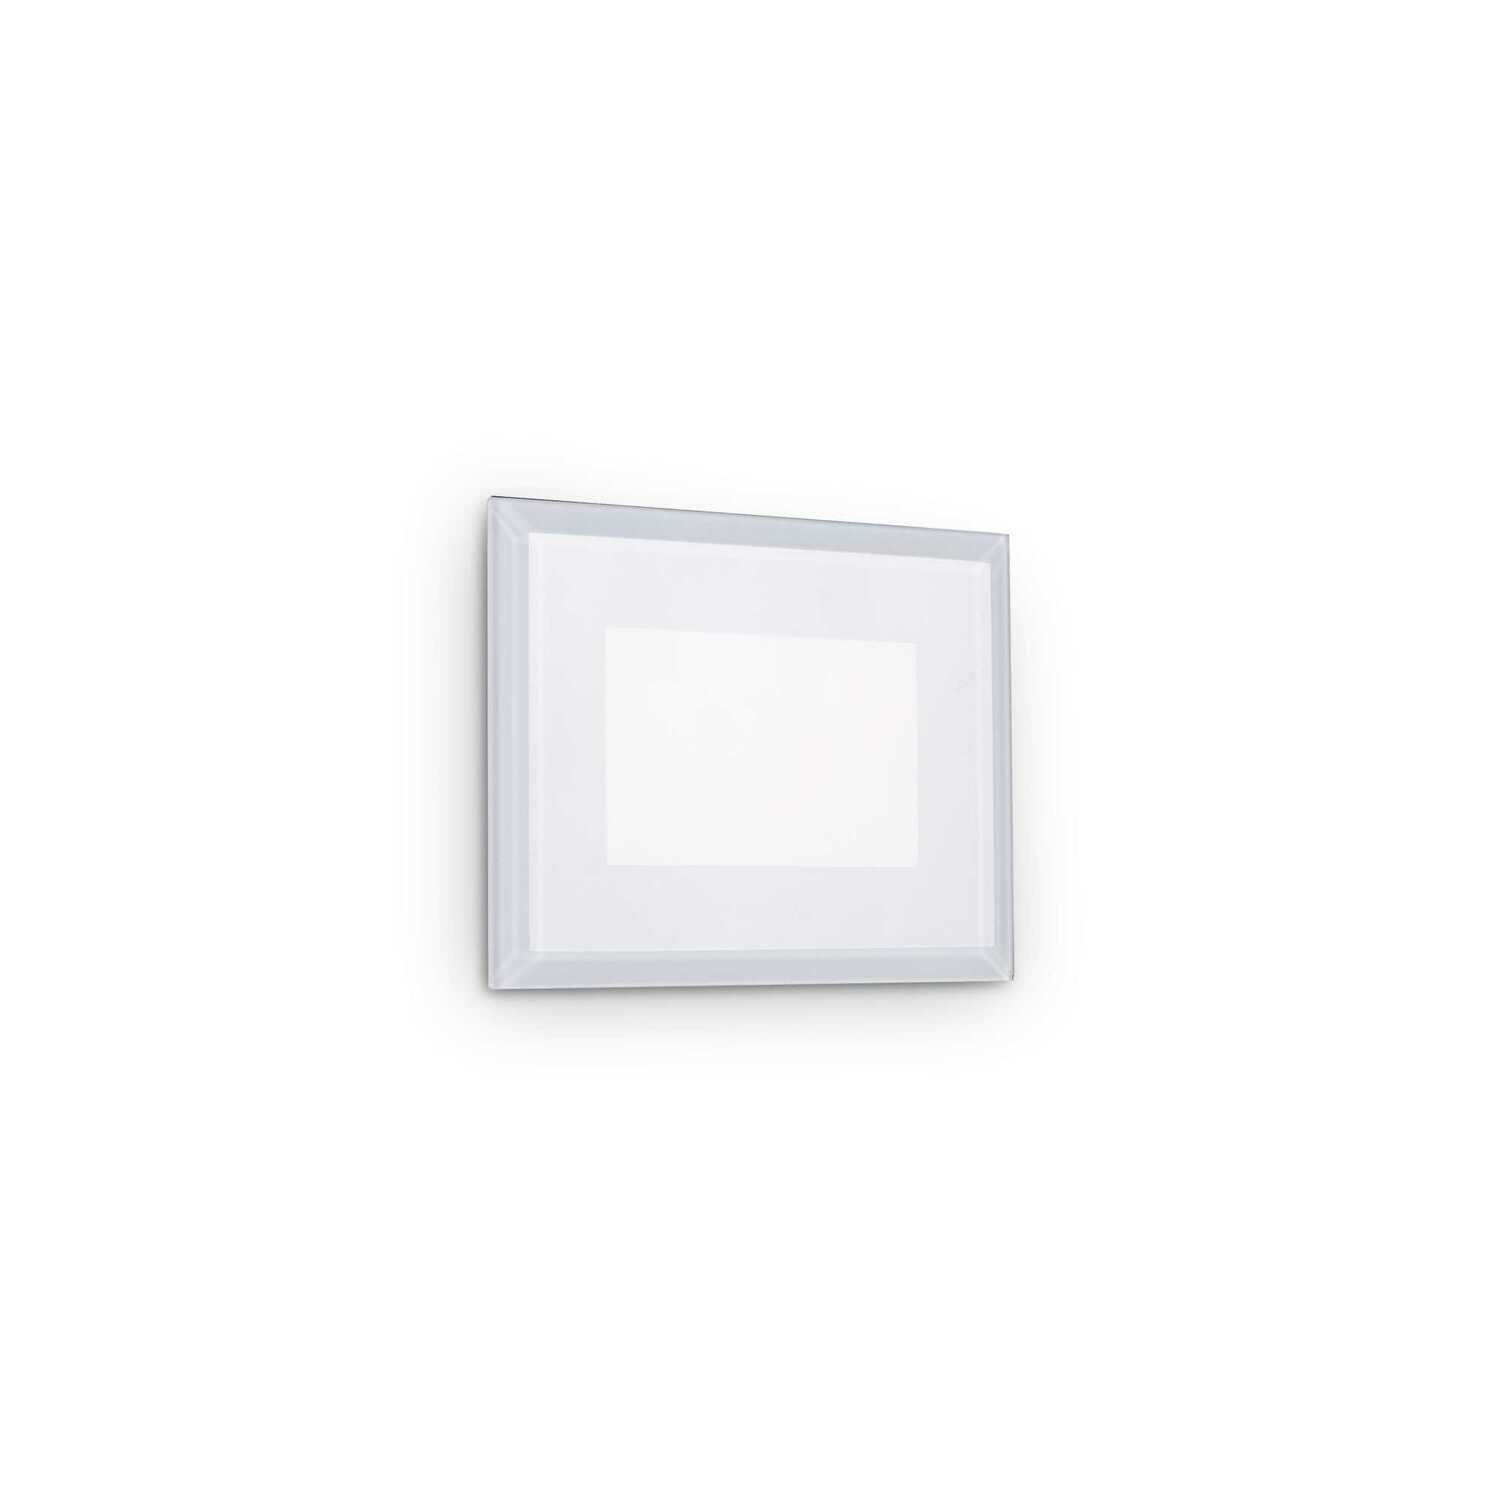 INDIO Recessed Rectangular Wall Lamp, 1x5W LED, 440lm IP65 White